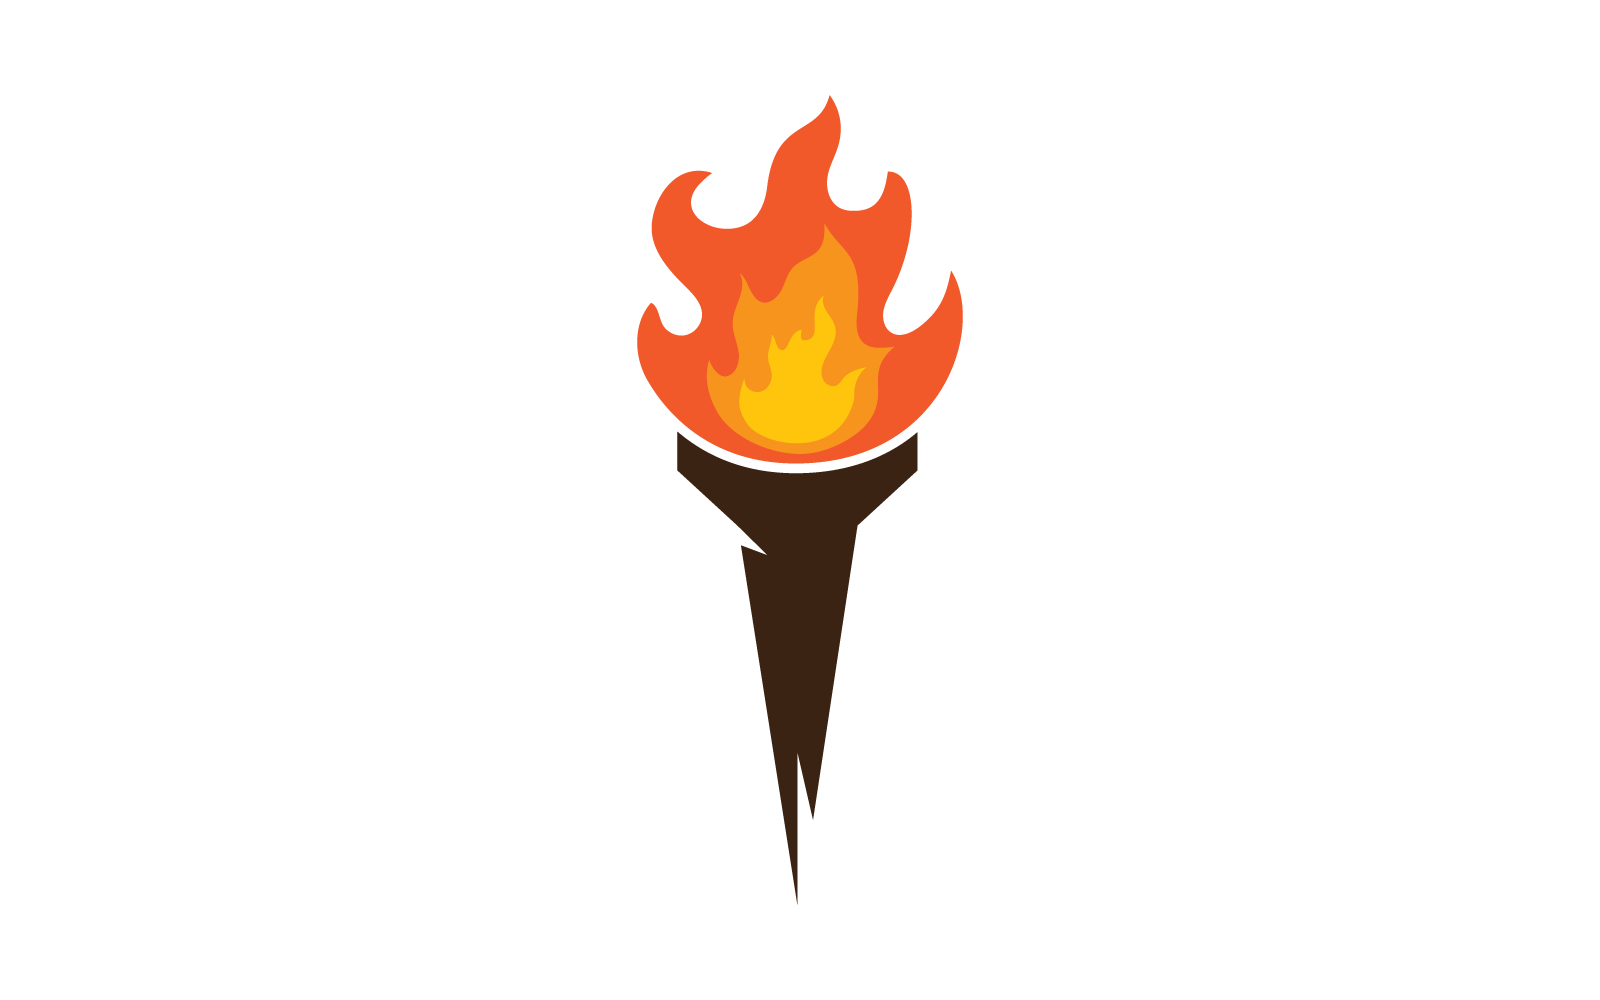 Illustration torch fire icon template flat design